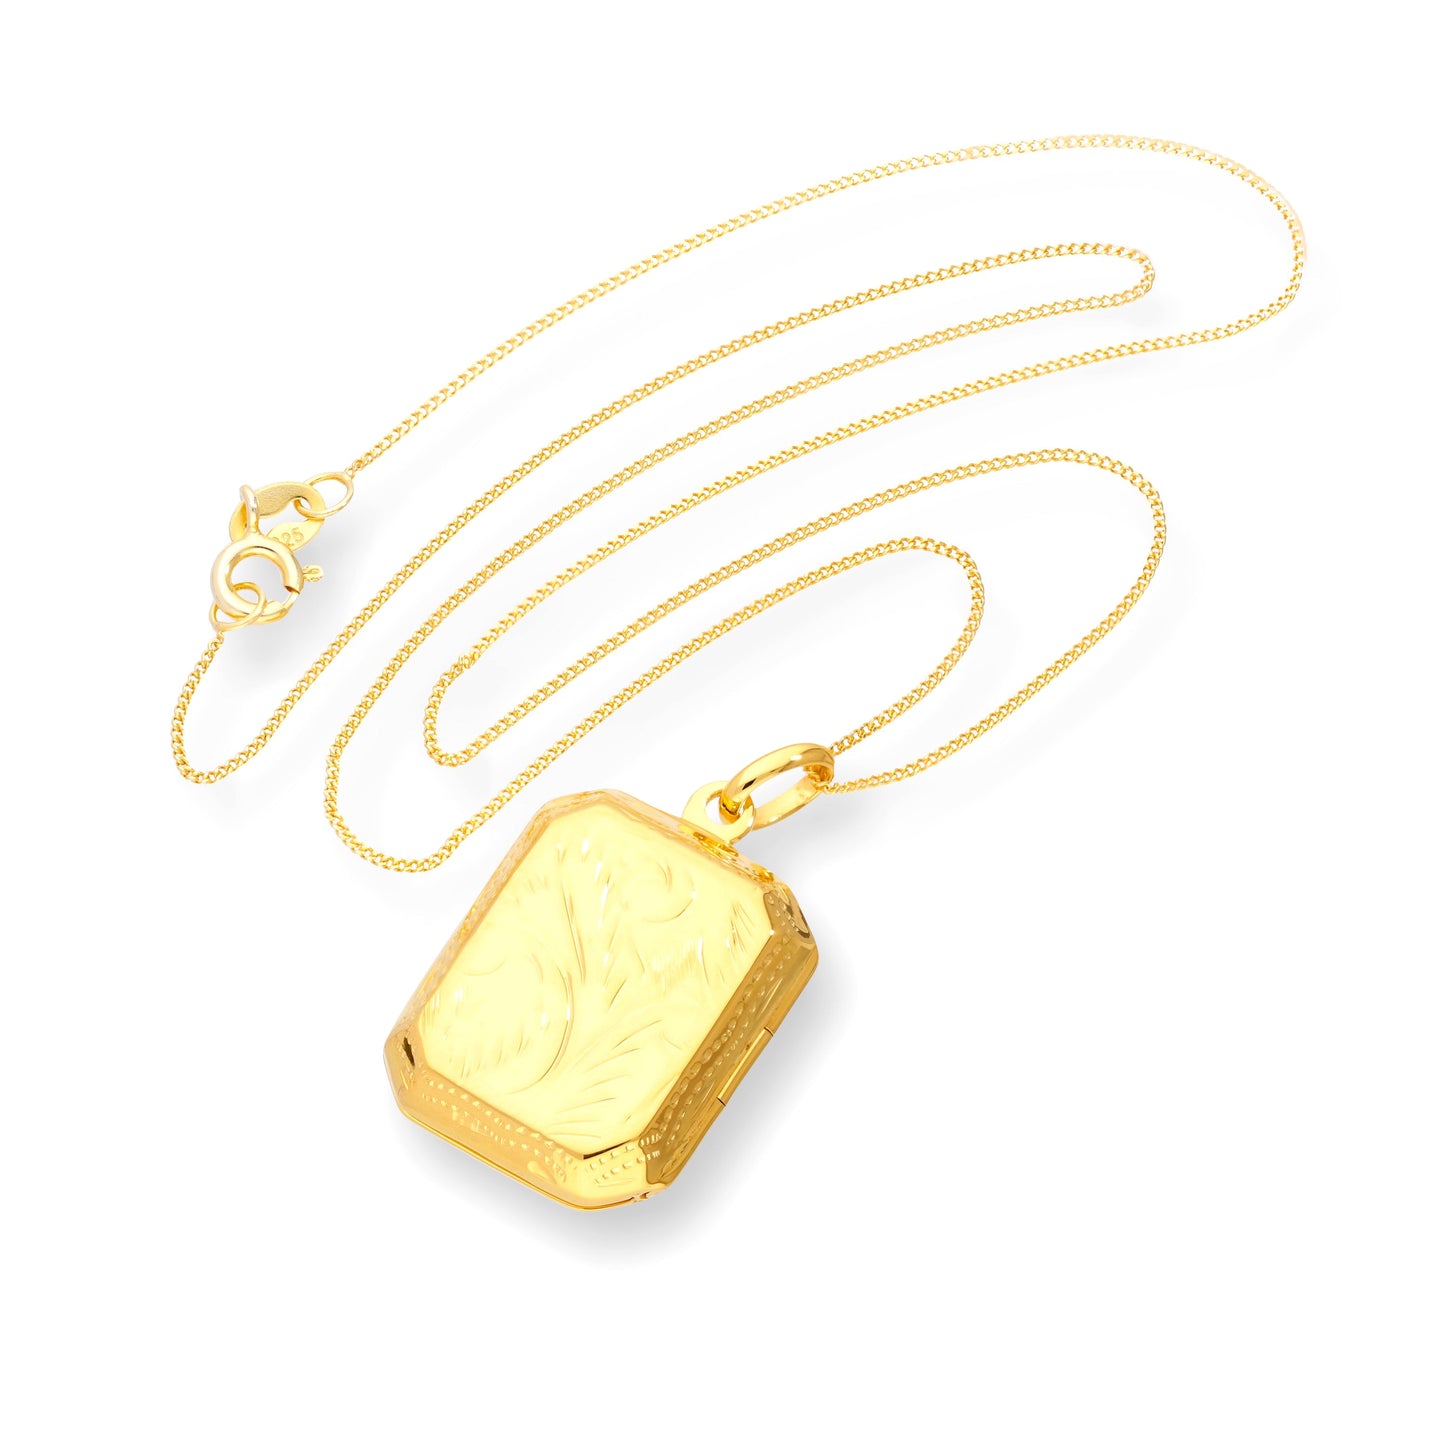 Gold Plated Sterling Silver Octagonal Engraved Locket 16 - 22 Inches